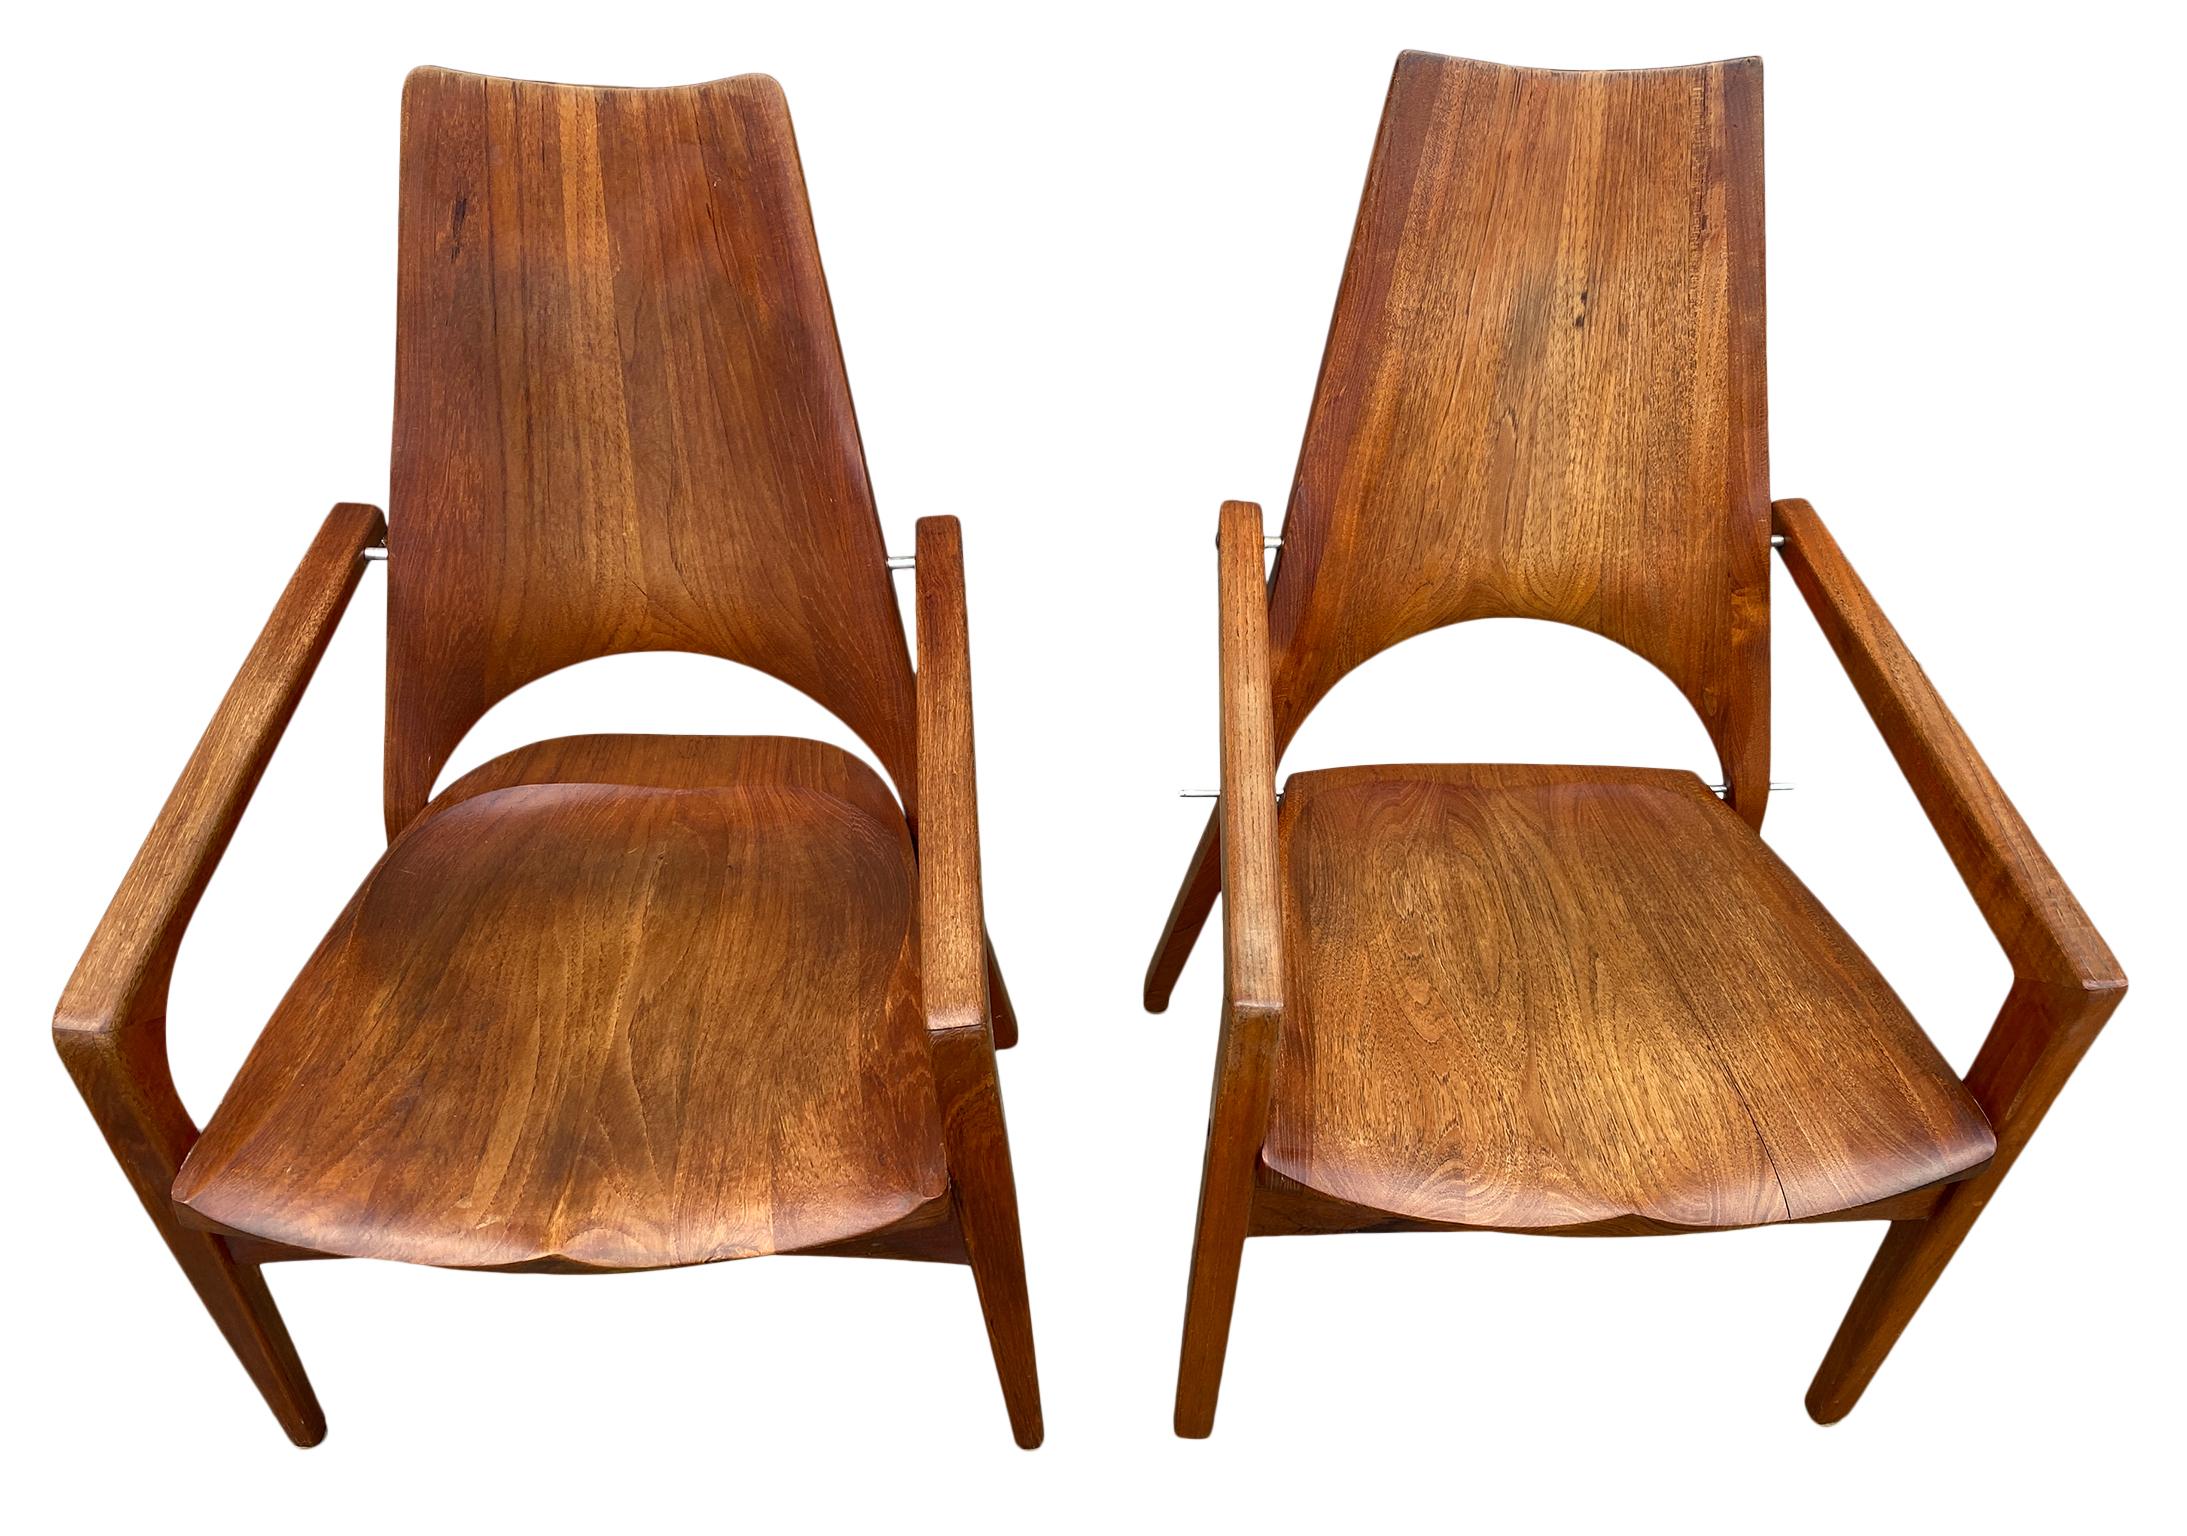 Leon C. Meyer midcentury studio craft pair of handmade chairs signed rare set. Leon C. Meyer was a Bay Area architect noted for designing round houses in the 1950s-1970s later in his life he designed and built furniture. These chairs are not